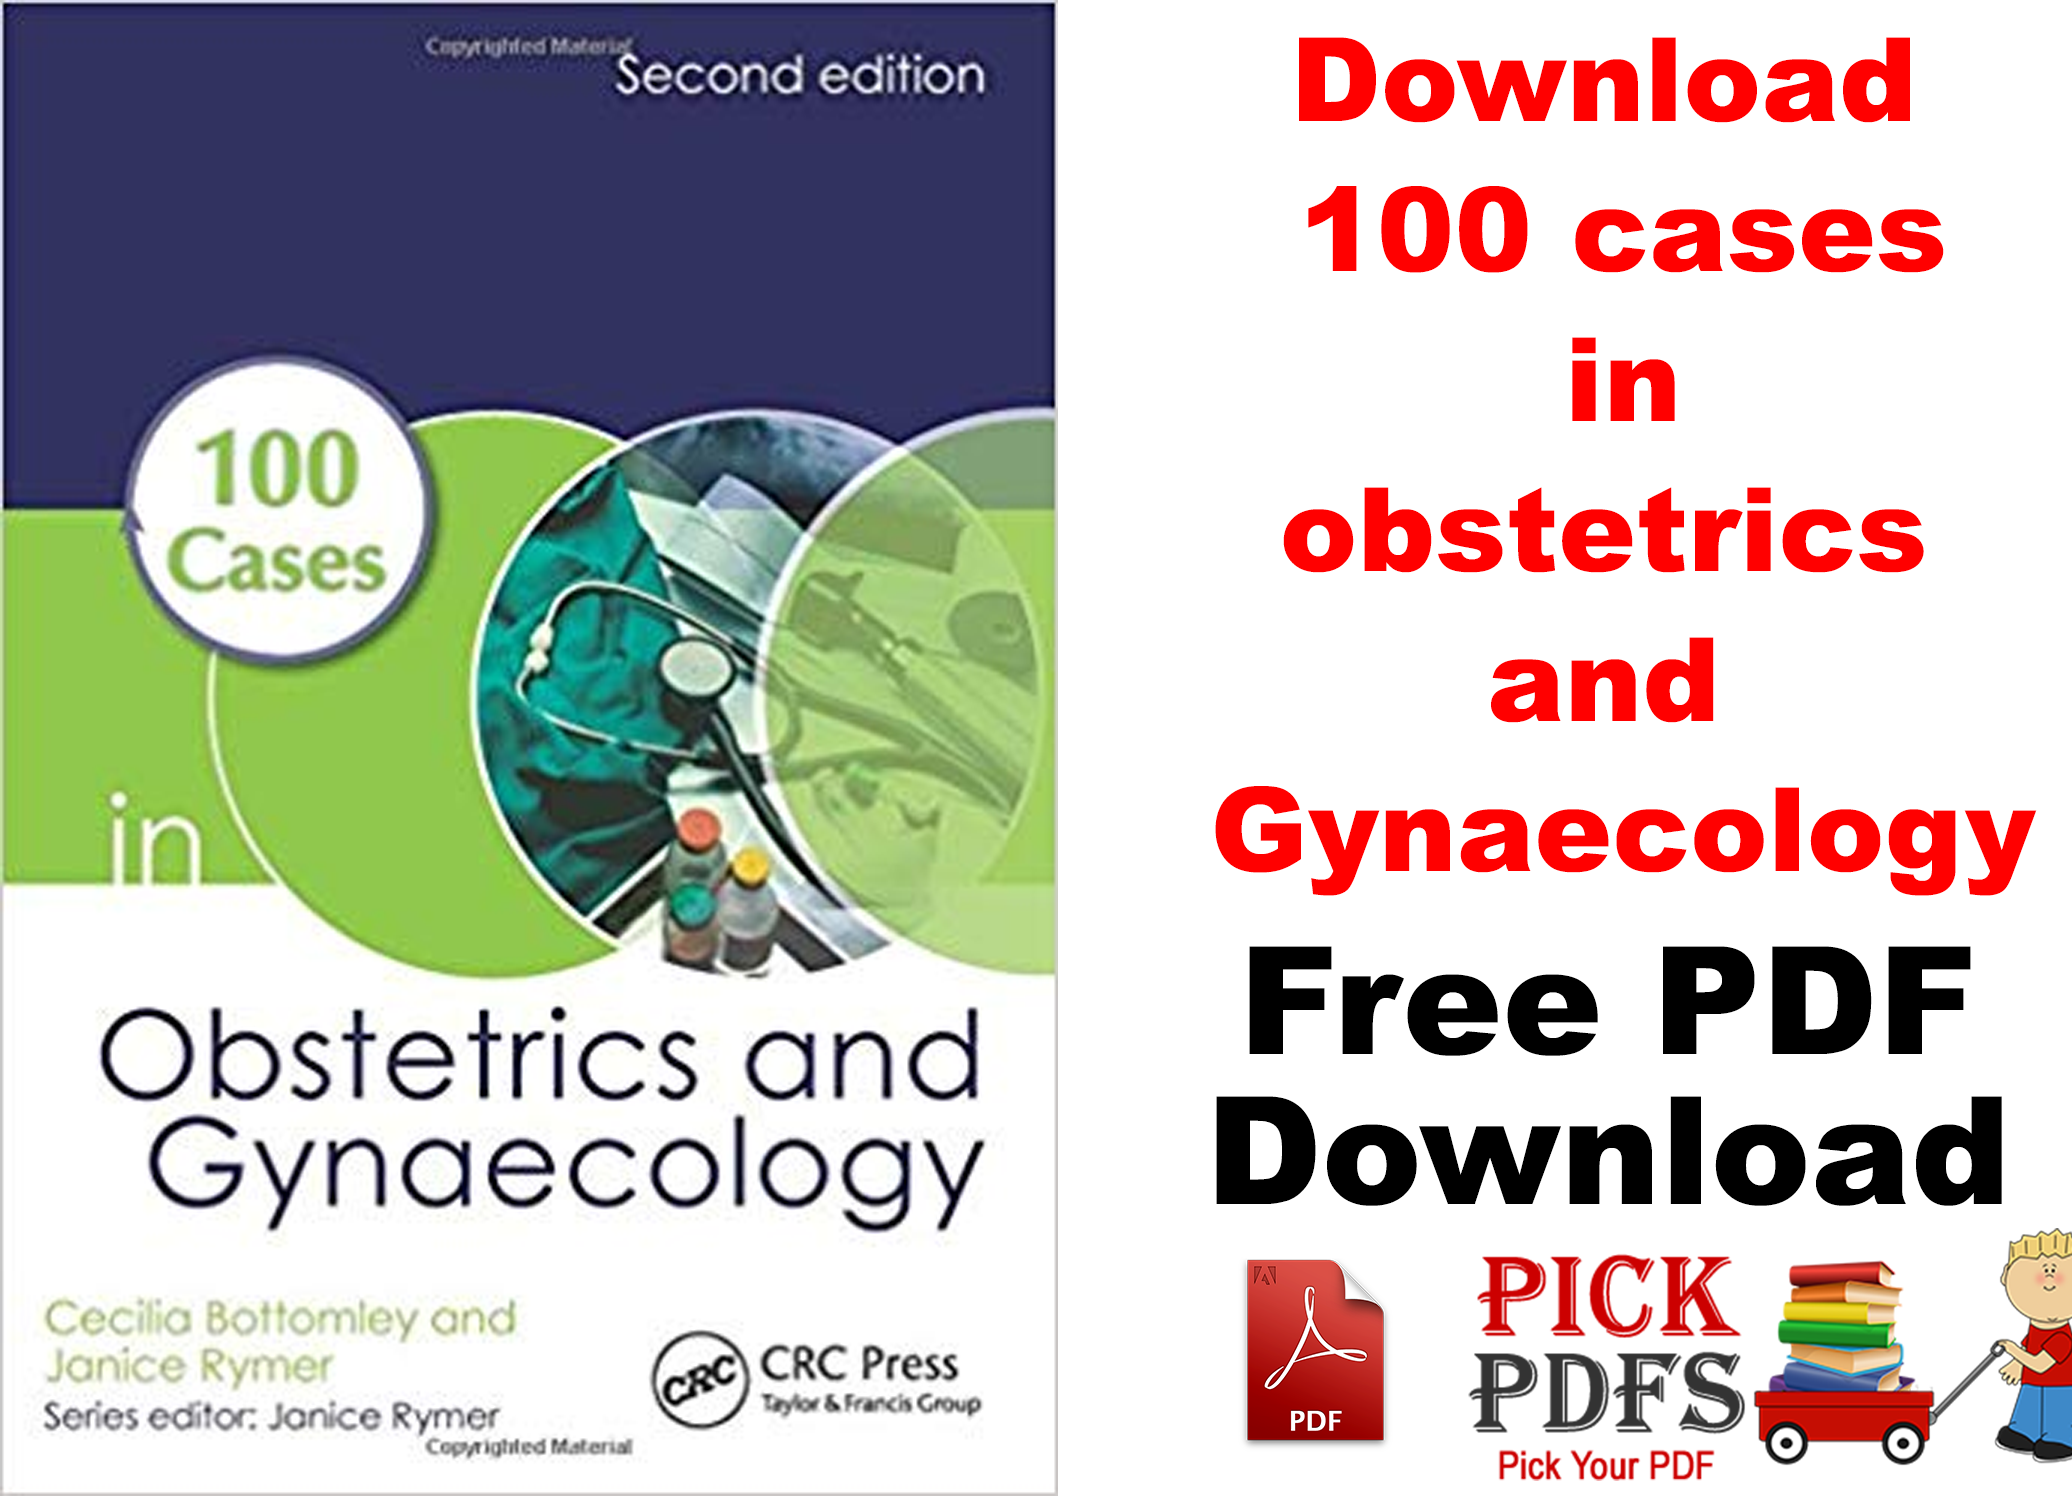 https://pickpdfs.com/download-blueprints-obstetrics-and-gynecology-pdf-7th-edition-free/